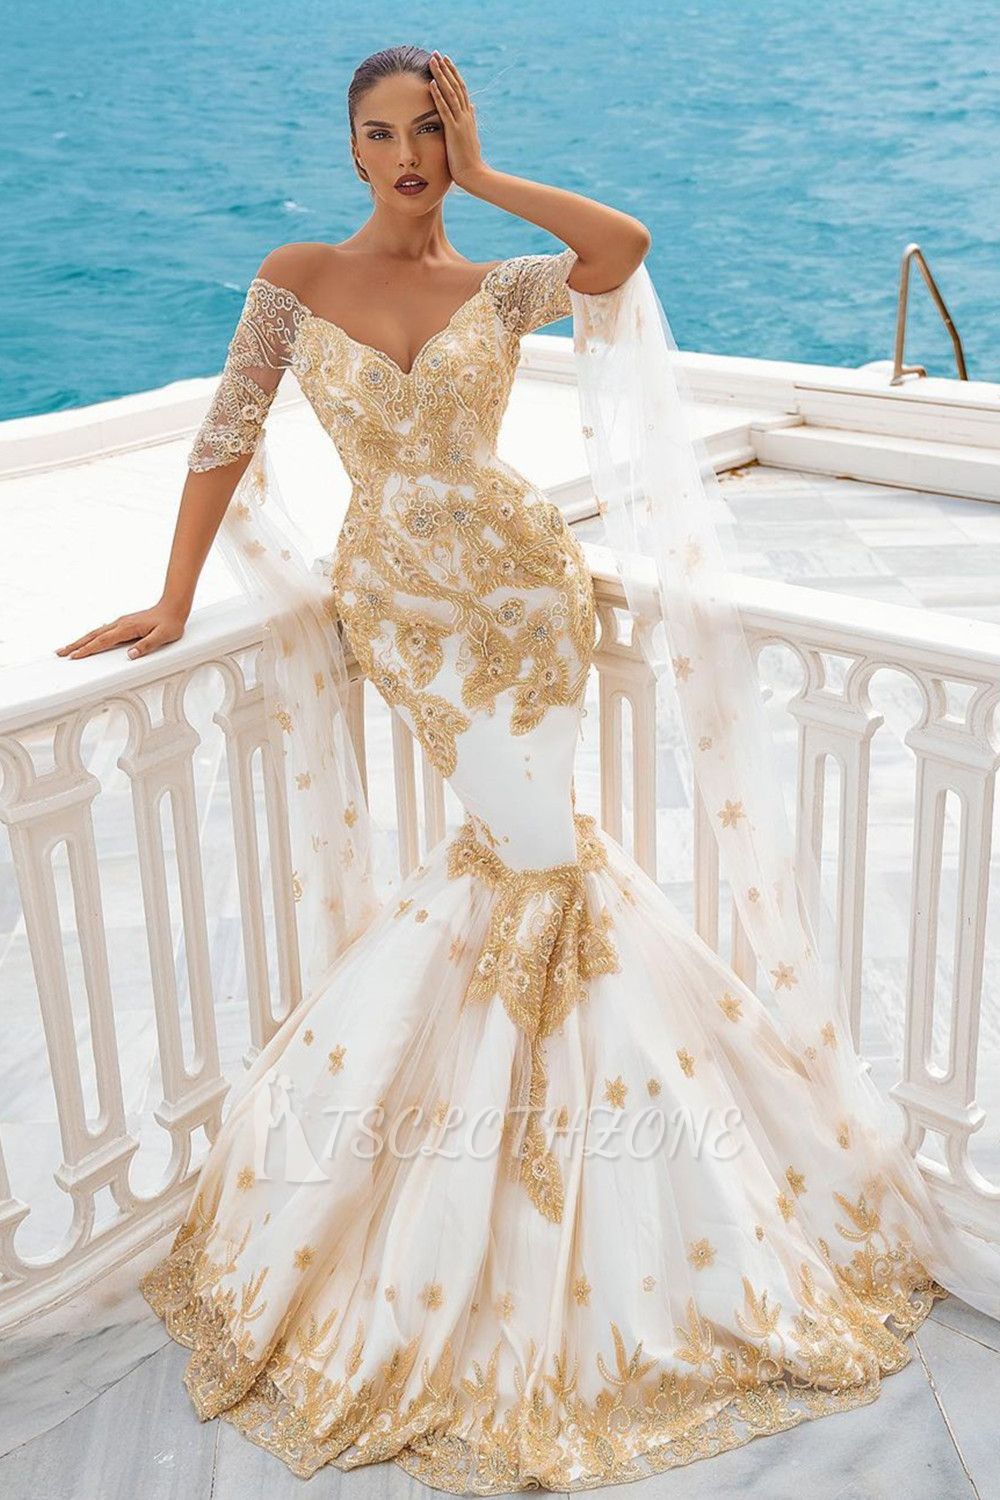 Mermaid Wedding Gowns Gold Appliques Half Sleeve Cape